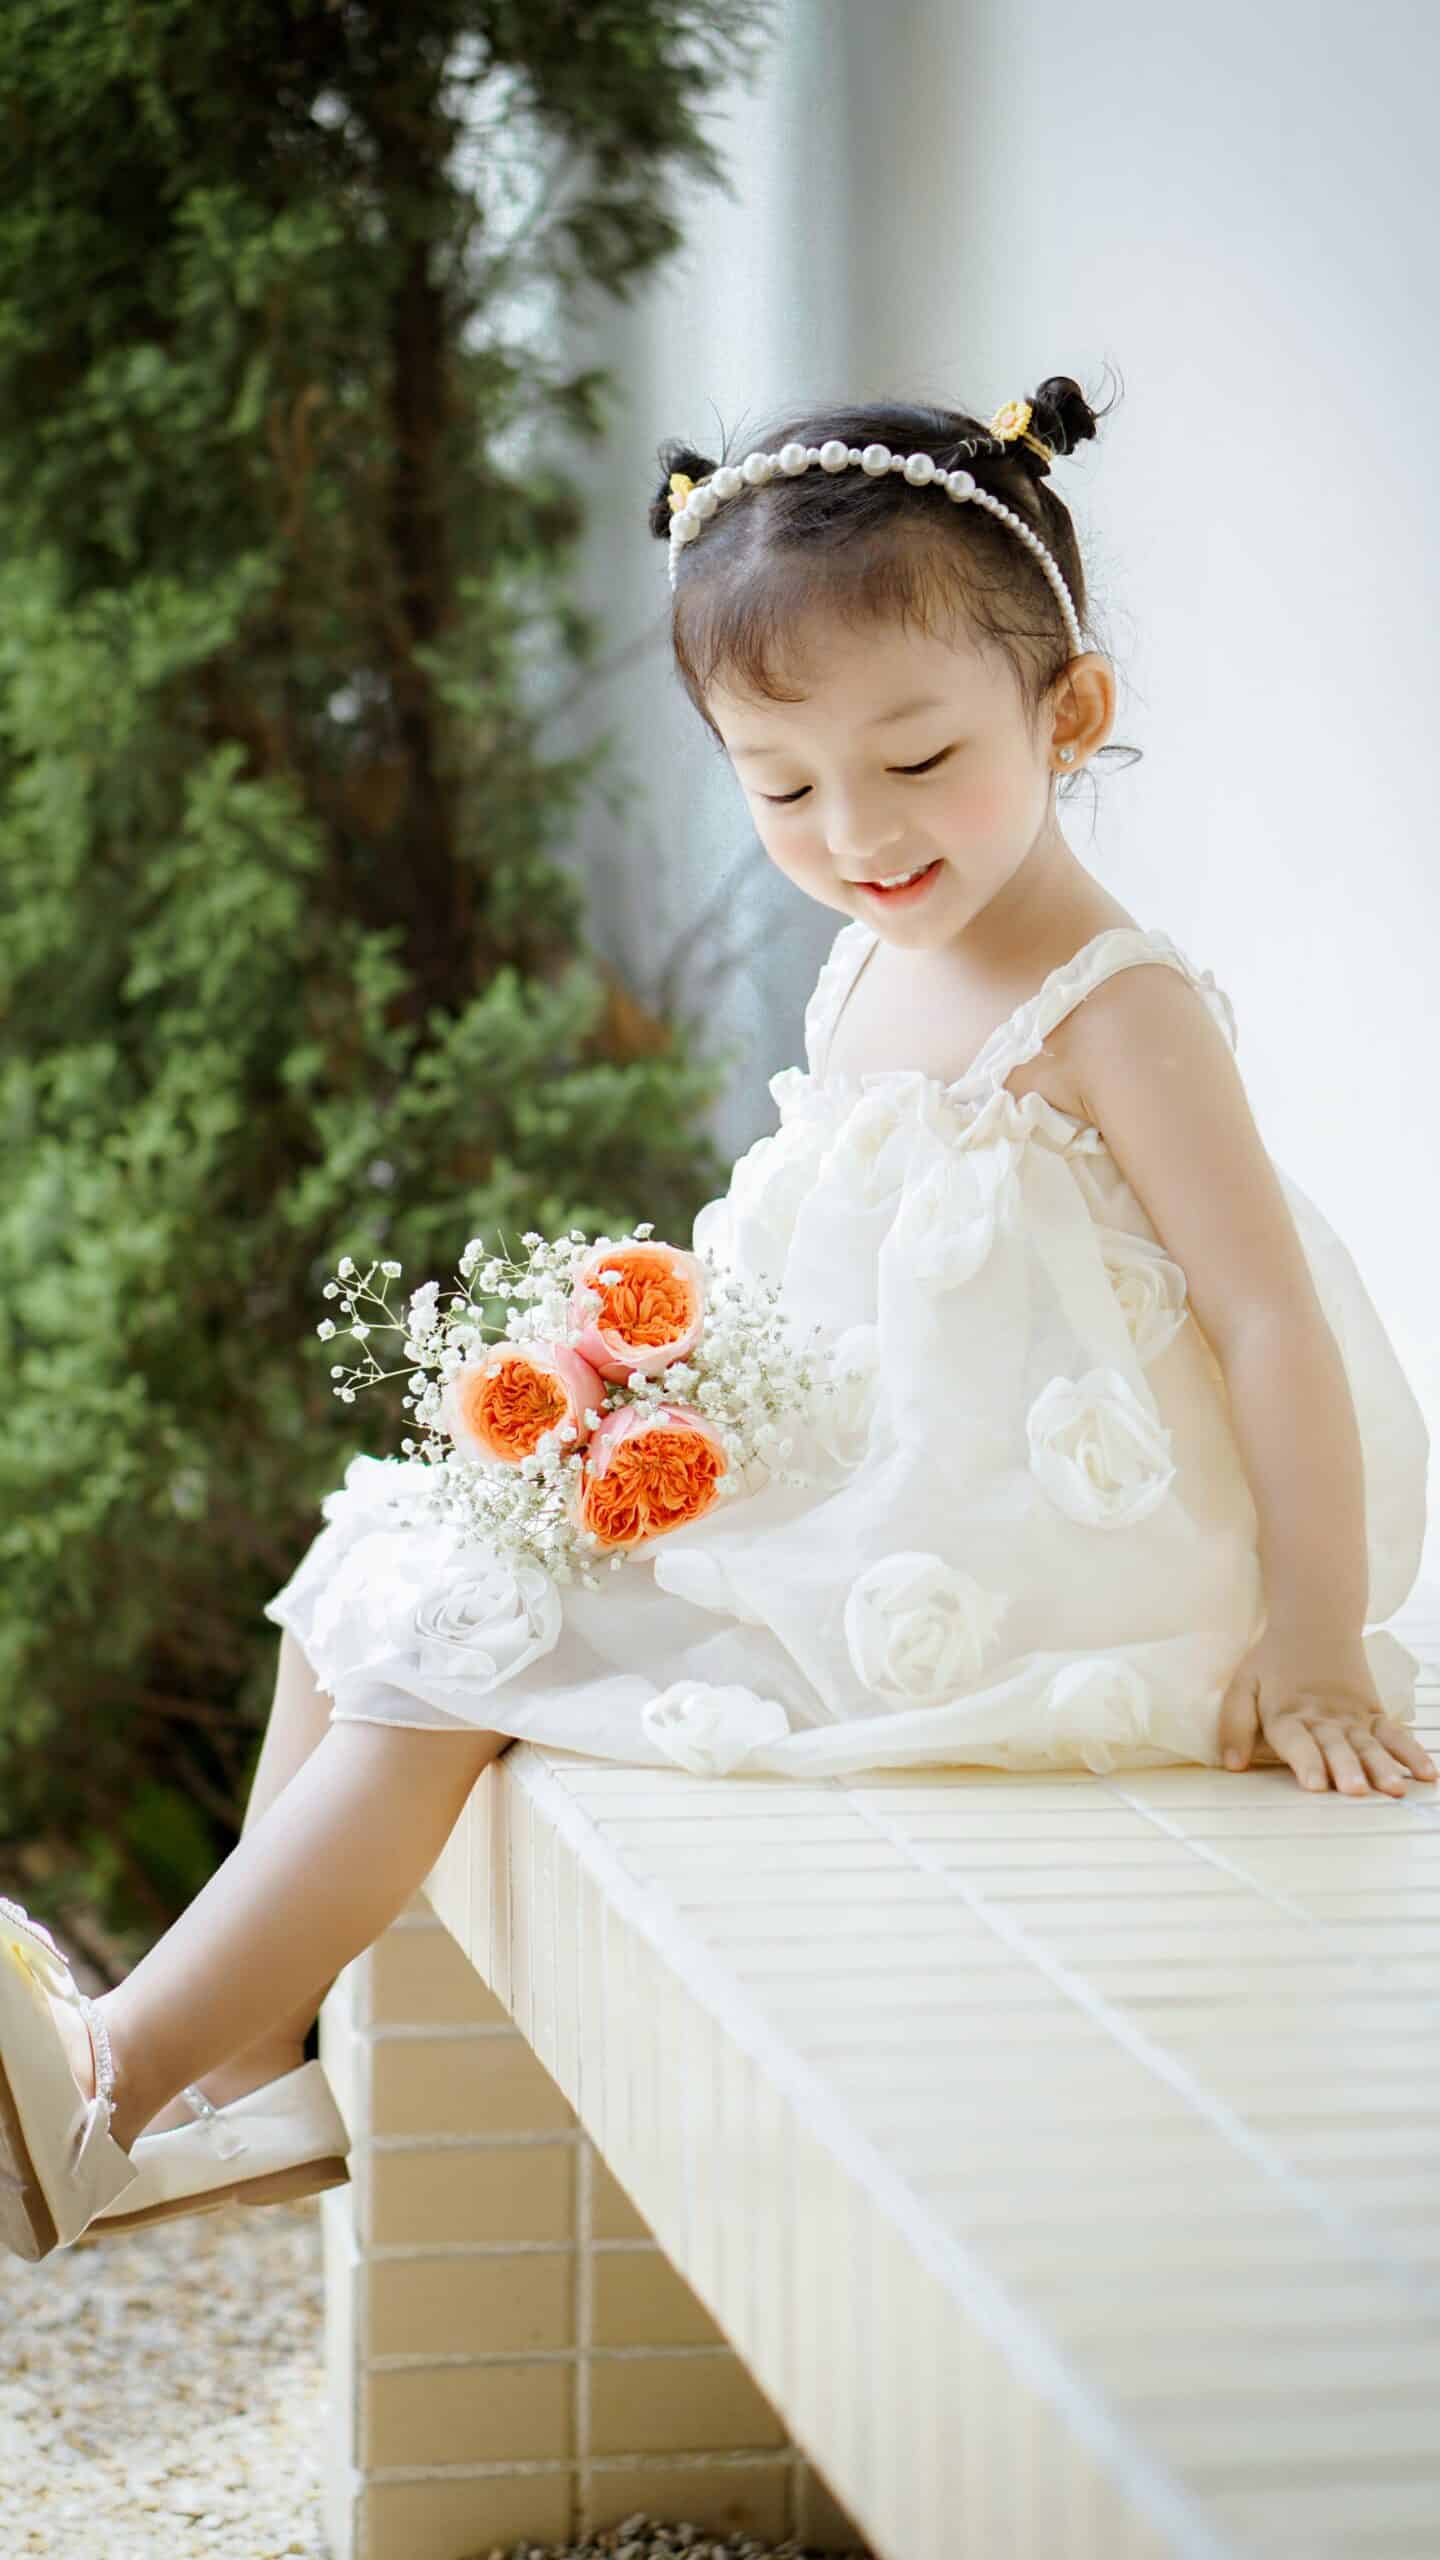 Adorable little girl joyfully holding a bouquet of flowers demonstrating the engaging and memorable experiences provided by Lifetime of Love Nannies scaled